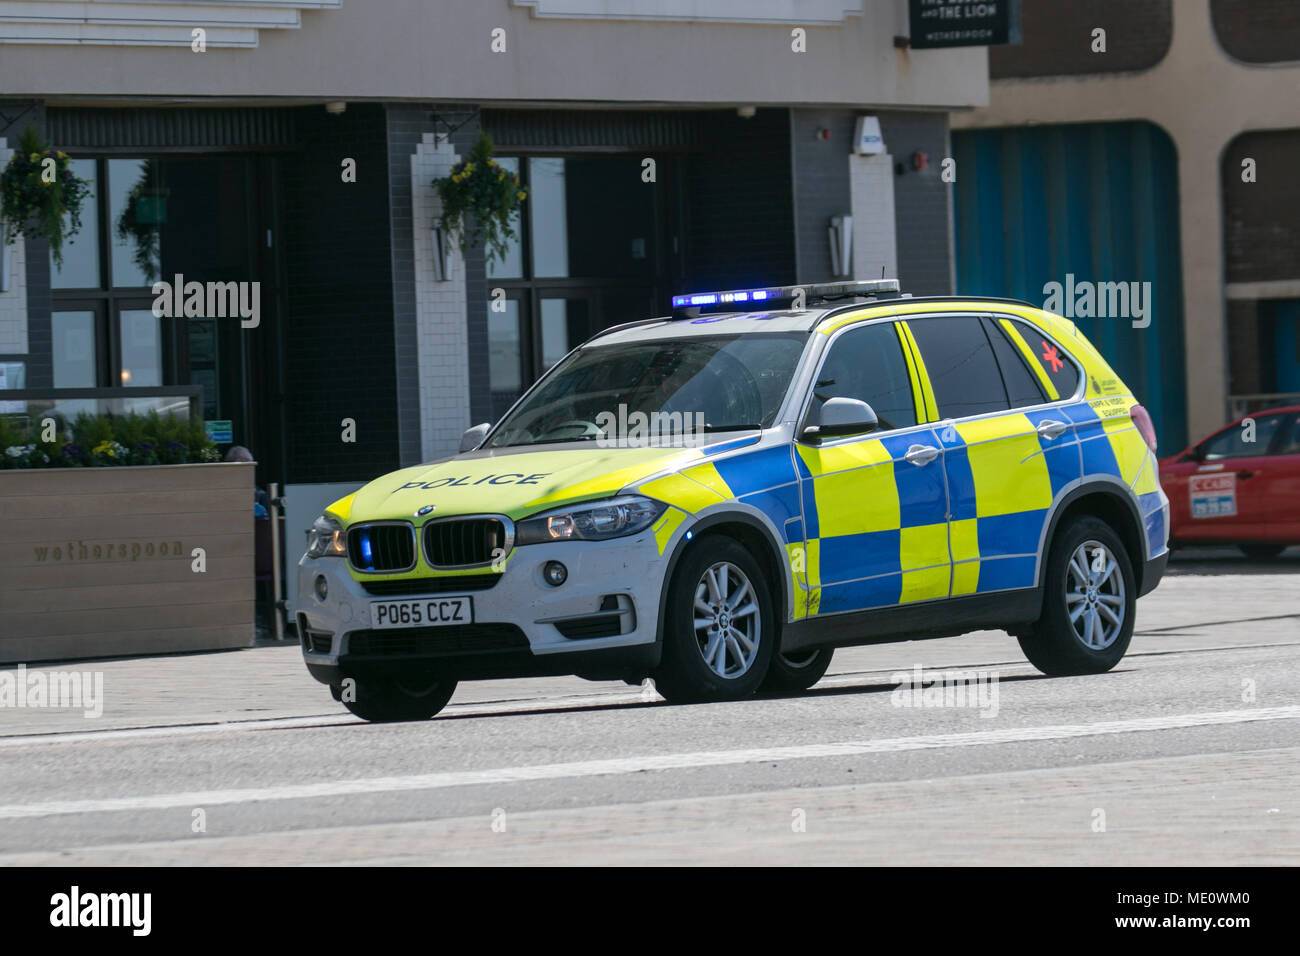 Blackpool police respond to emergency call, on the seafront promenade, UK Stock Photo